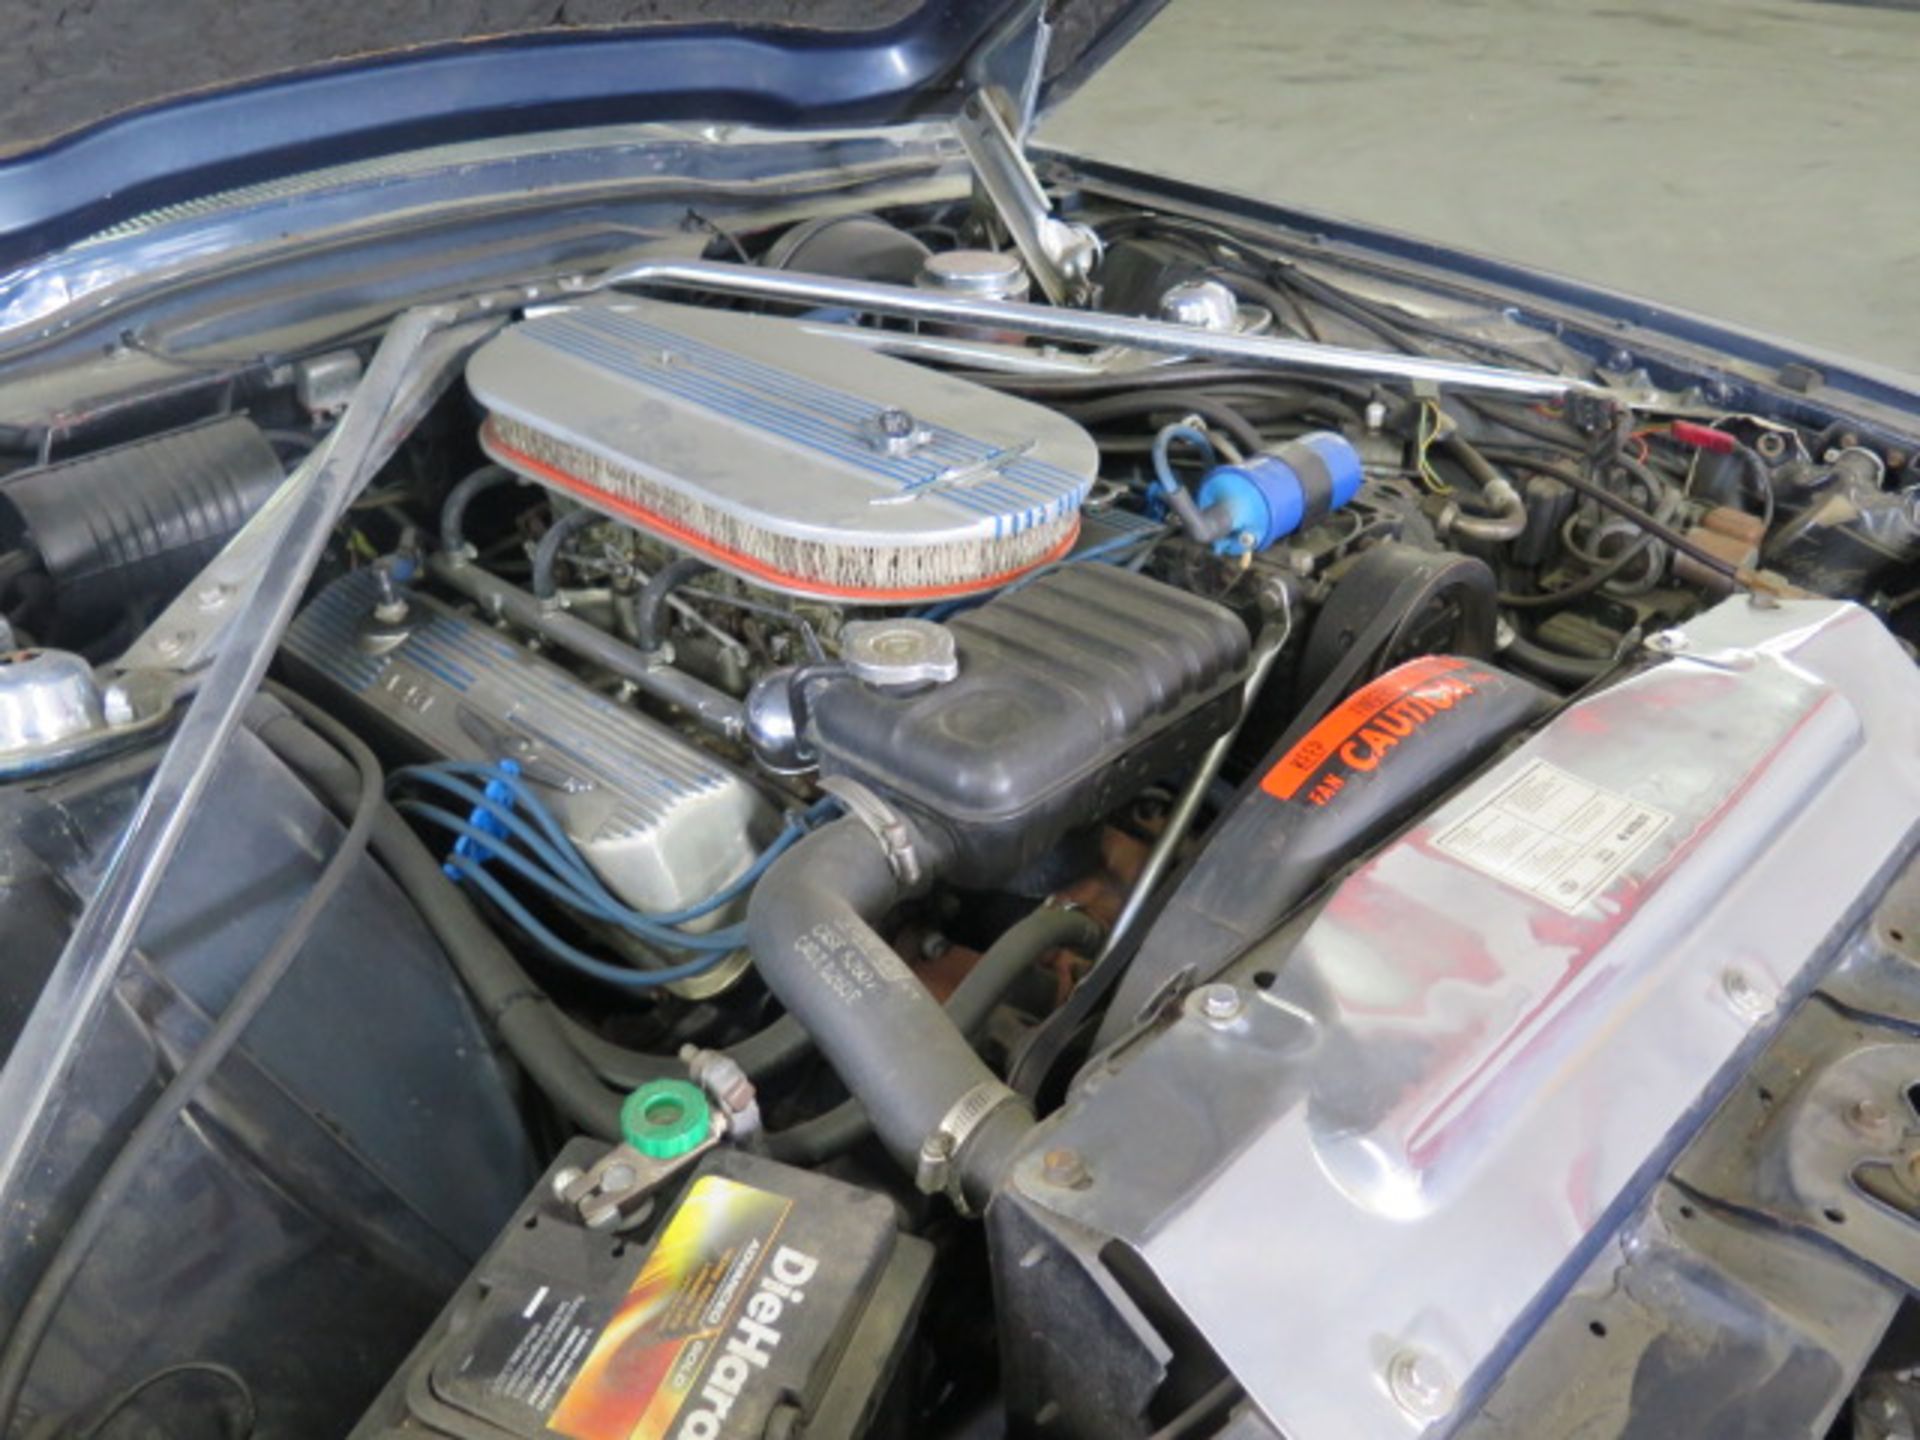 1966 Ford Thunderbird Convertible w/ “Q” Designation V8 428 CID 4 Barrel Carb Gas, SOLD AS IS - Image 14 of 46